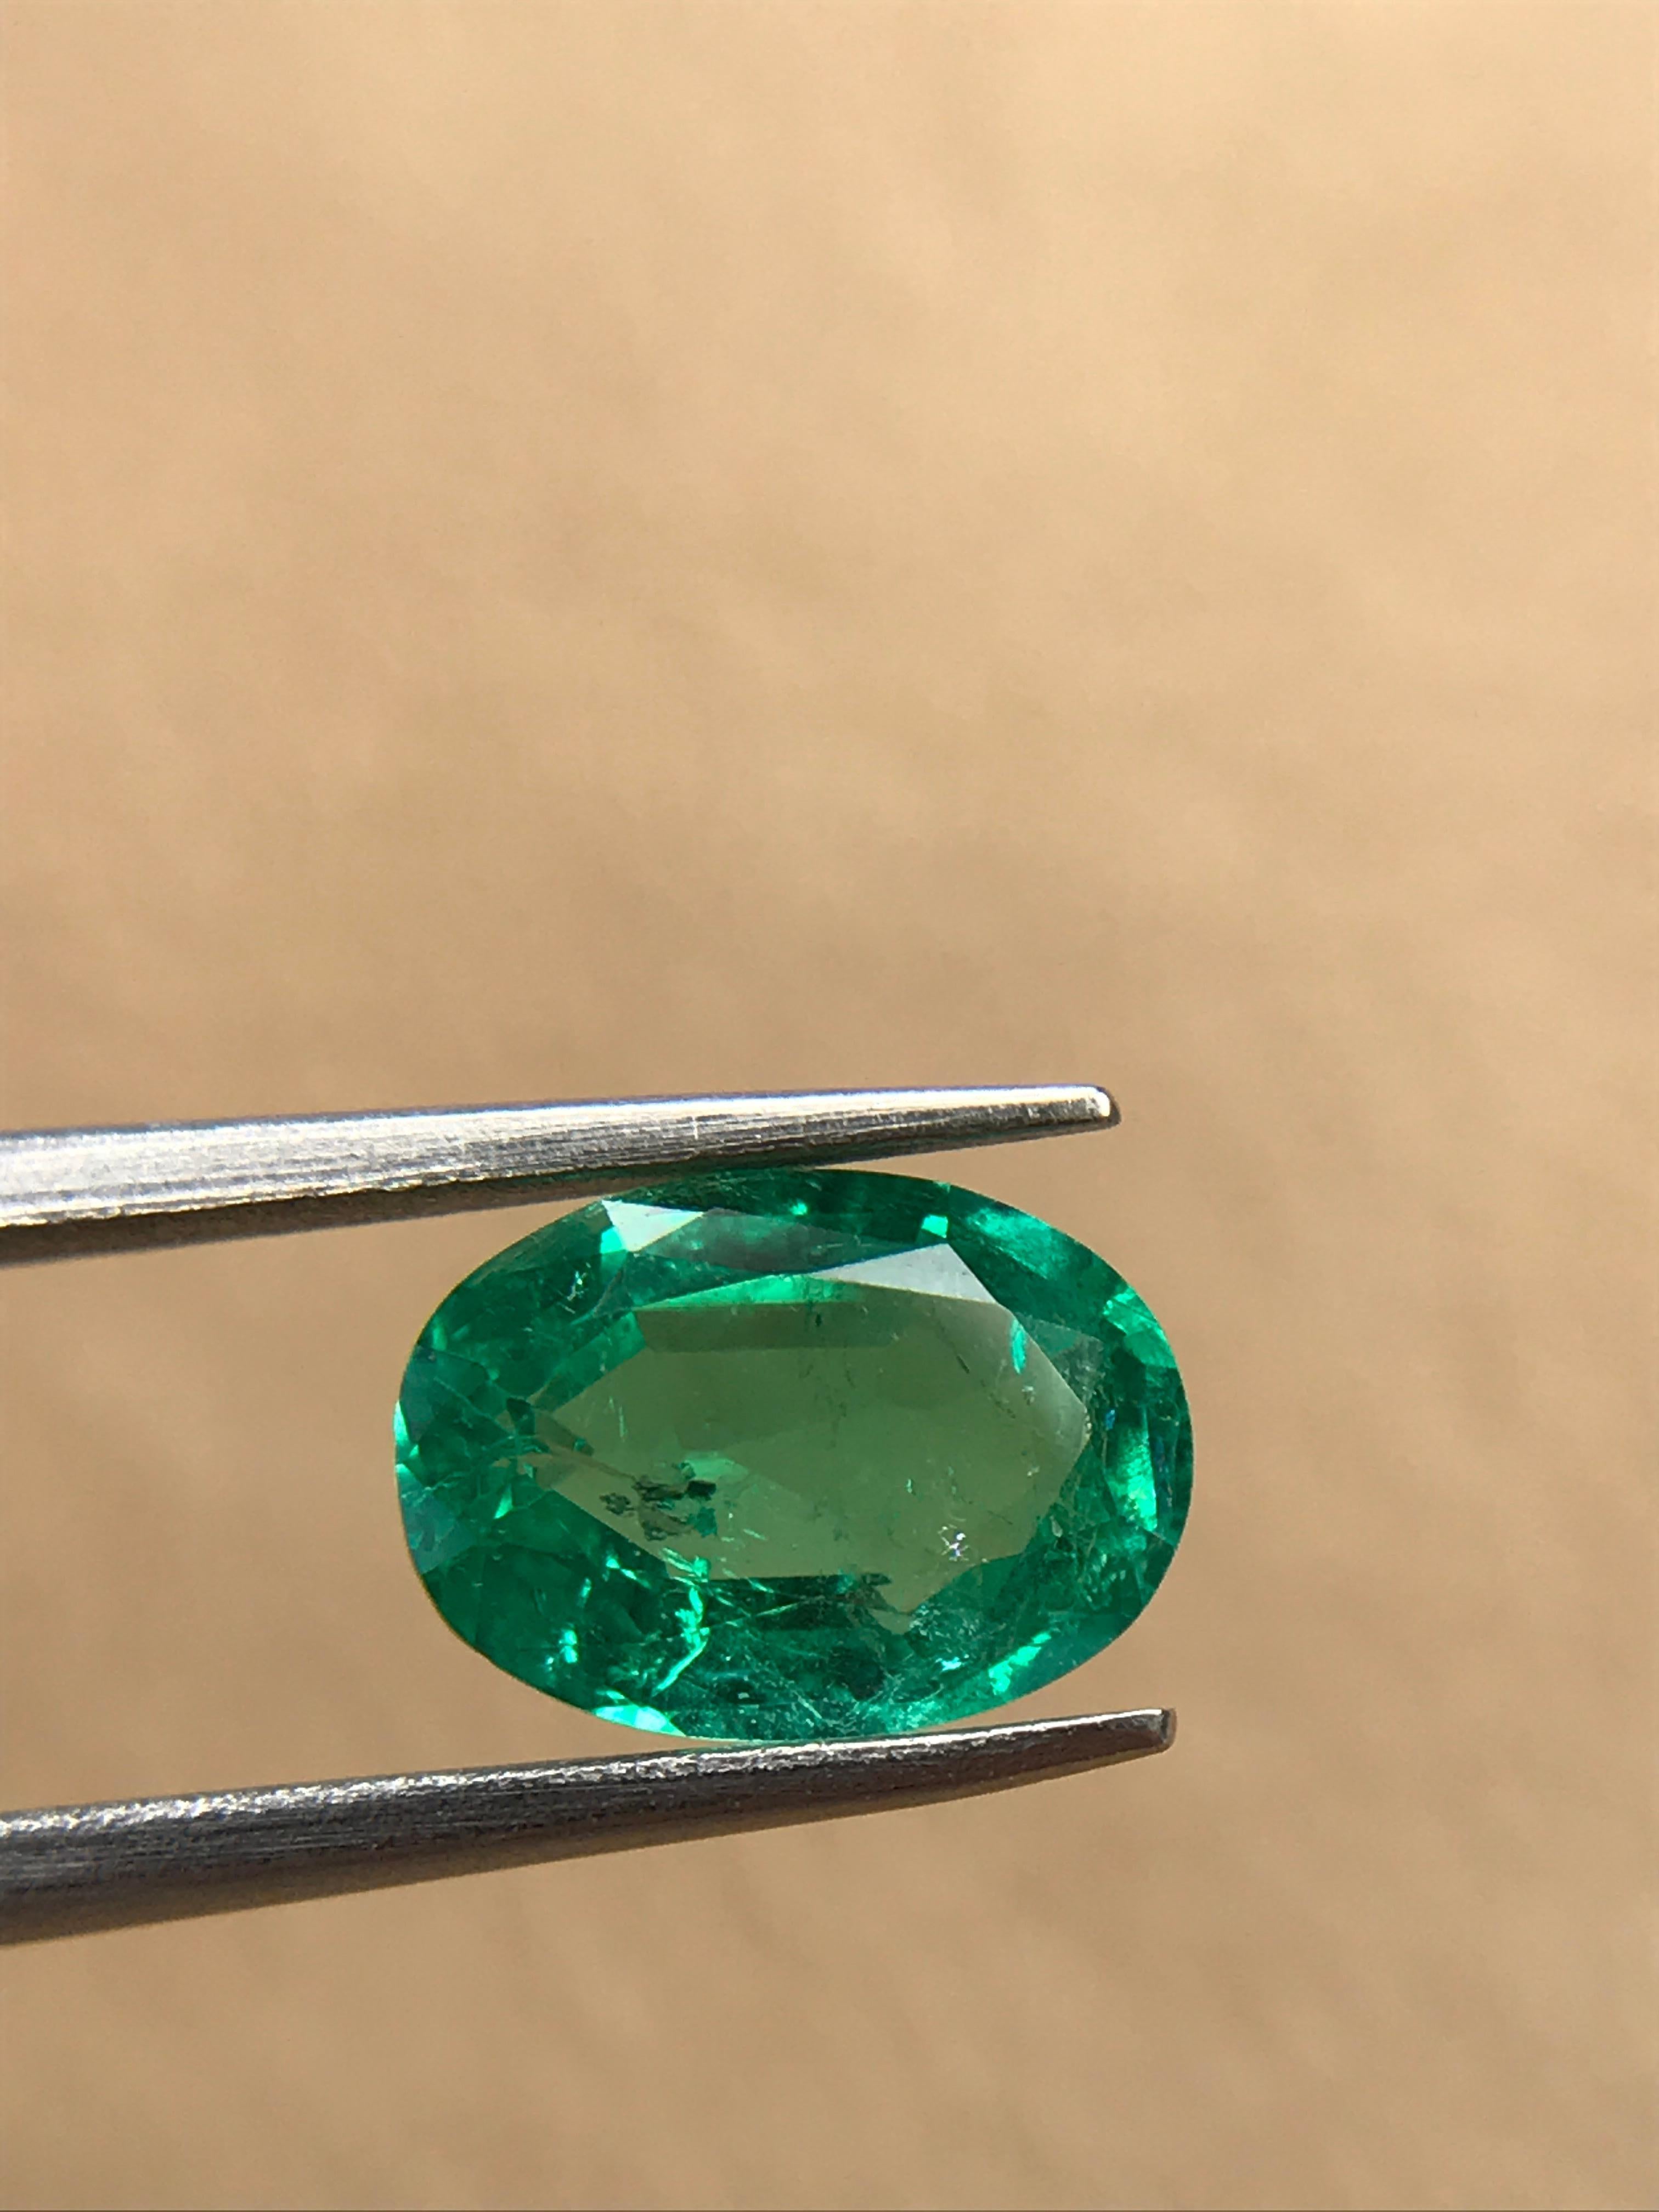 Oval Cut 1.19 Carat Oval, Colombian Emerald For Sale